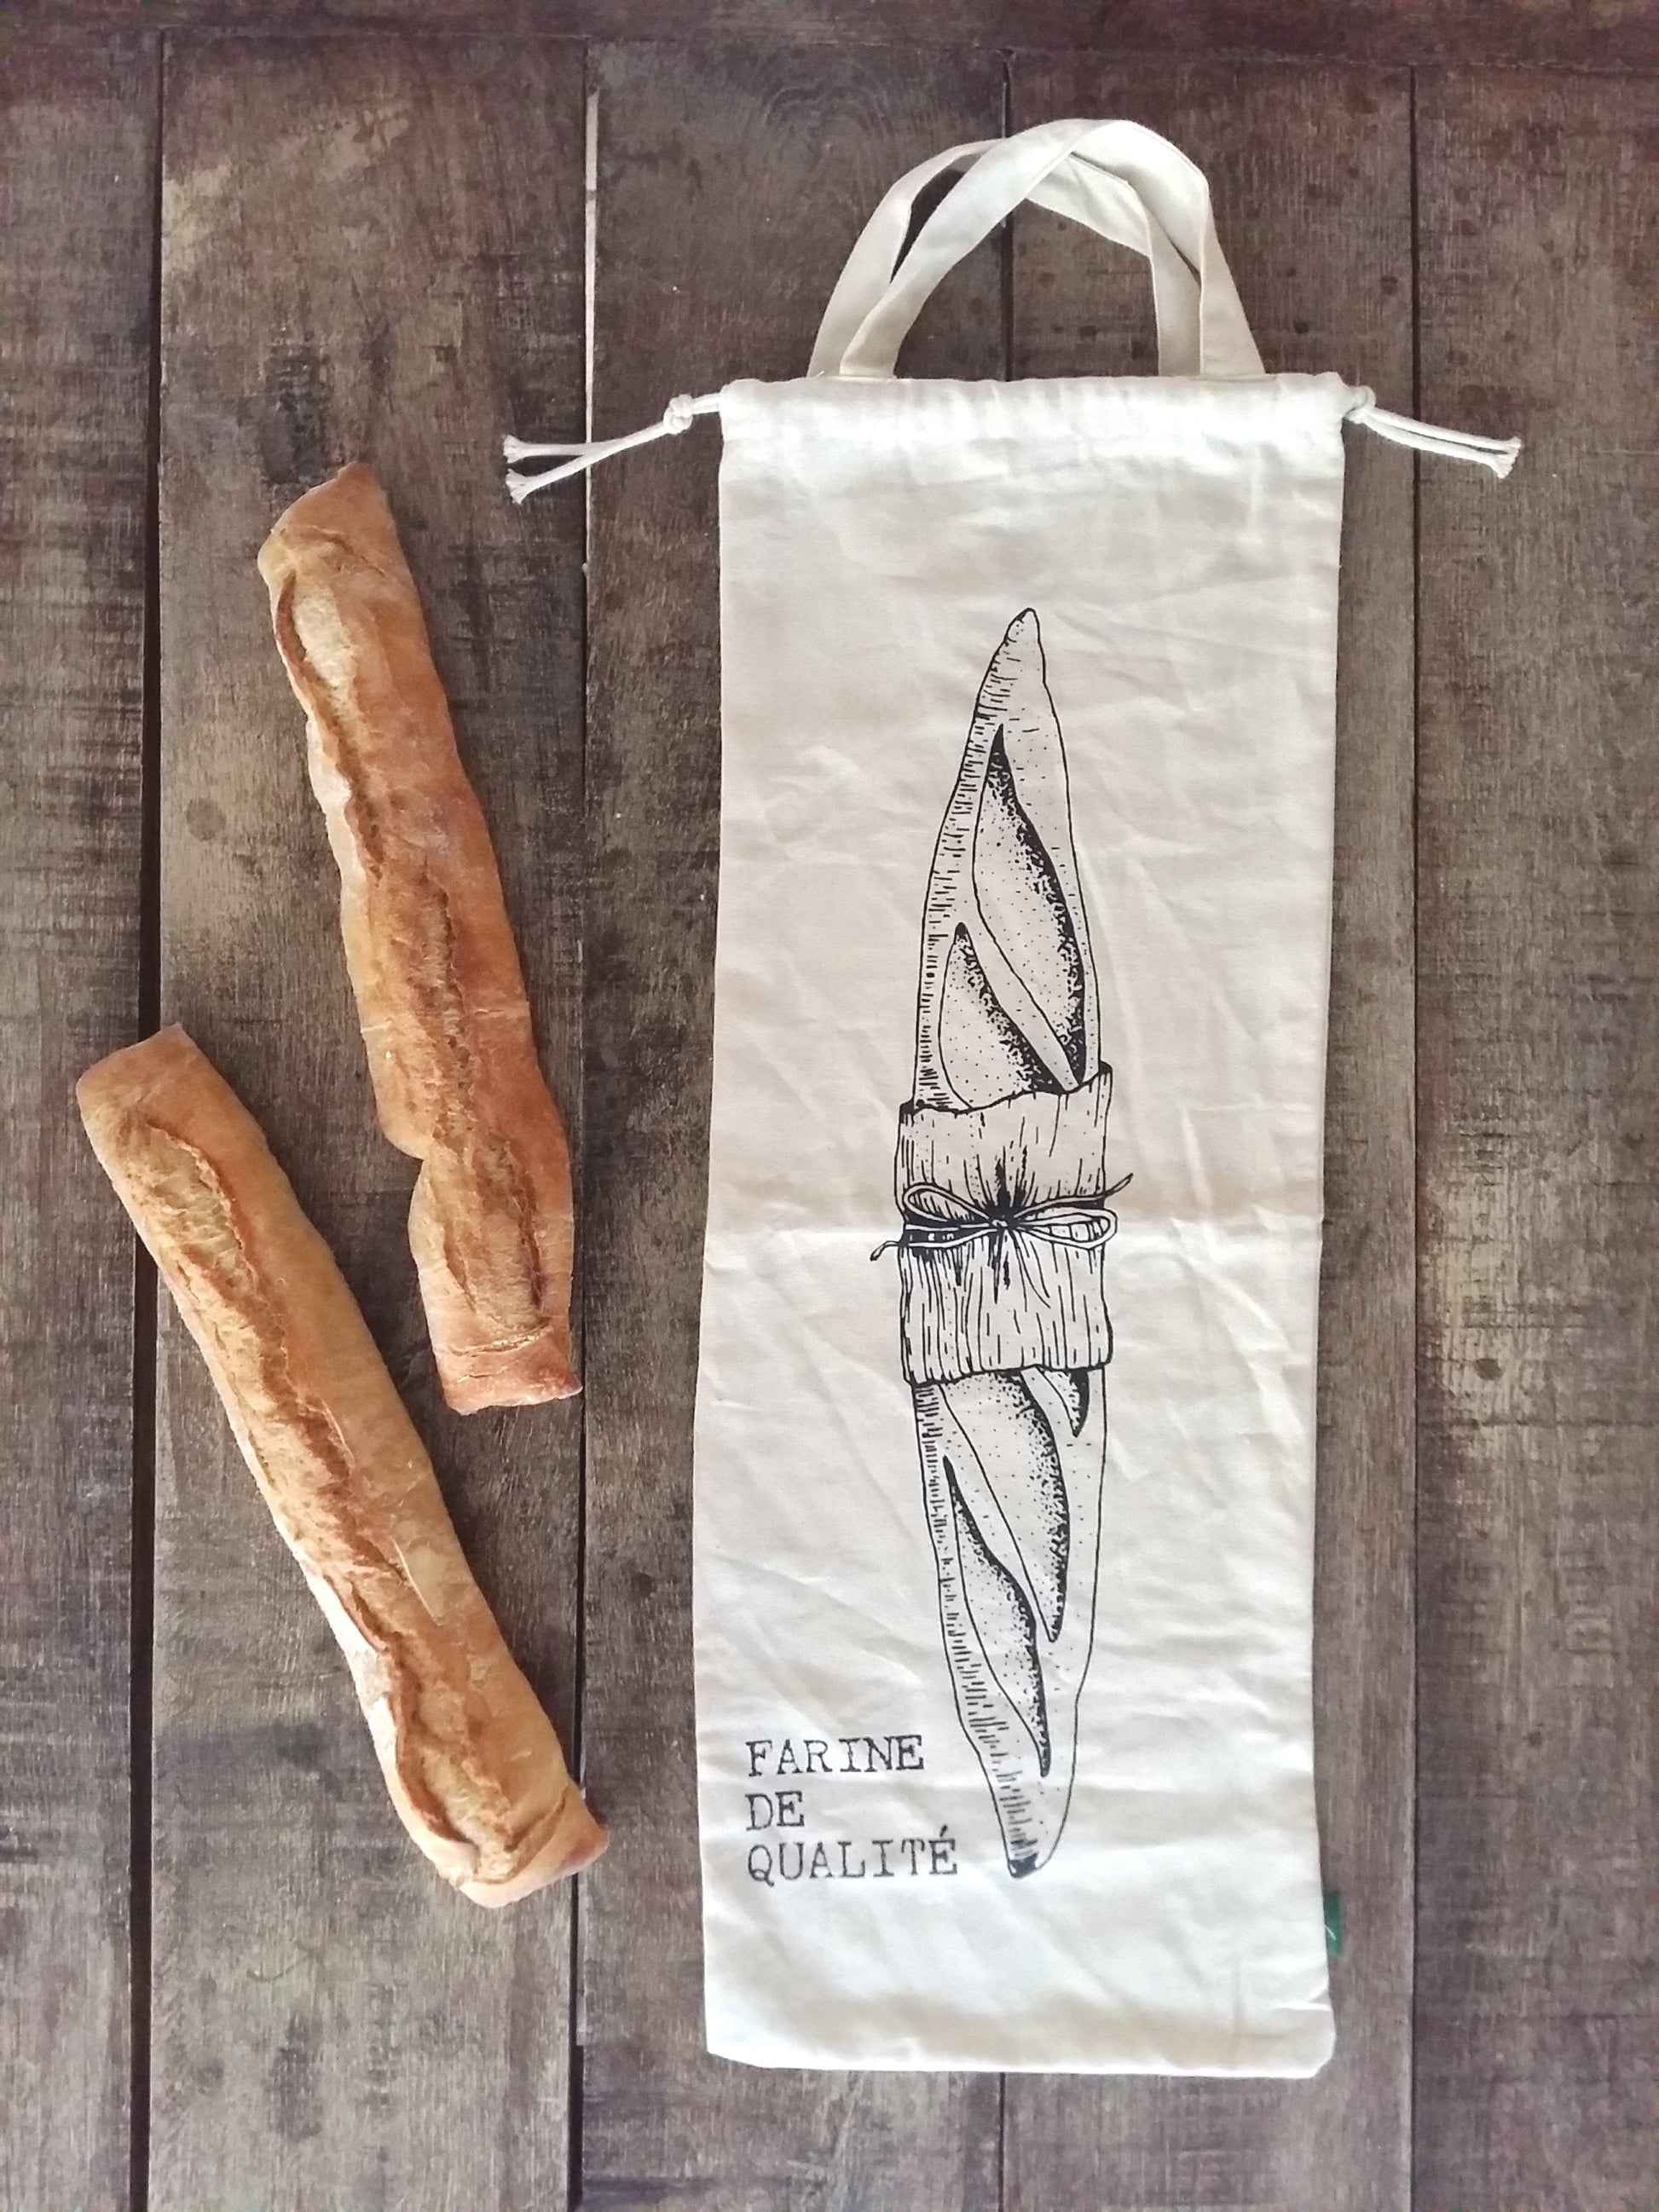 100% Cotton Baguette Storage Bag. Reusable Bread Bag with Drawstrings & Handles. from Tiggy & Pip - €29.99! Shop now at Tiggy and Pip